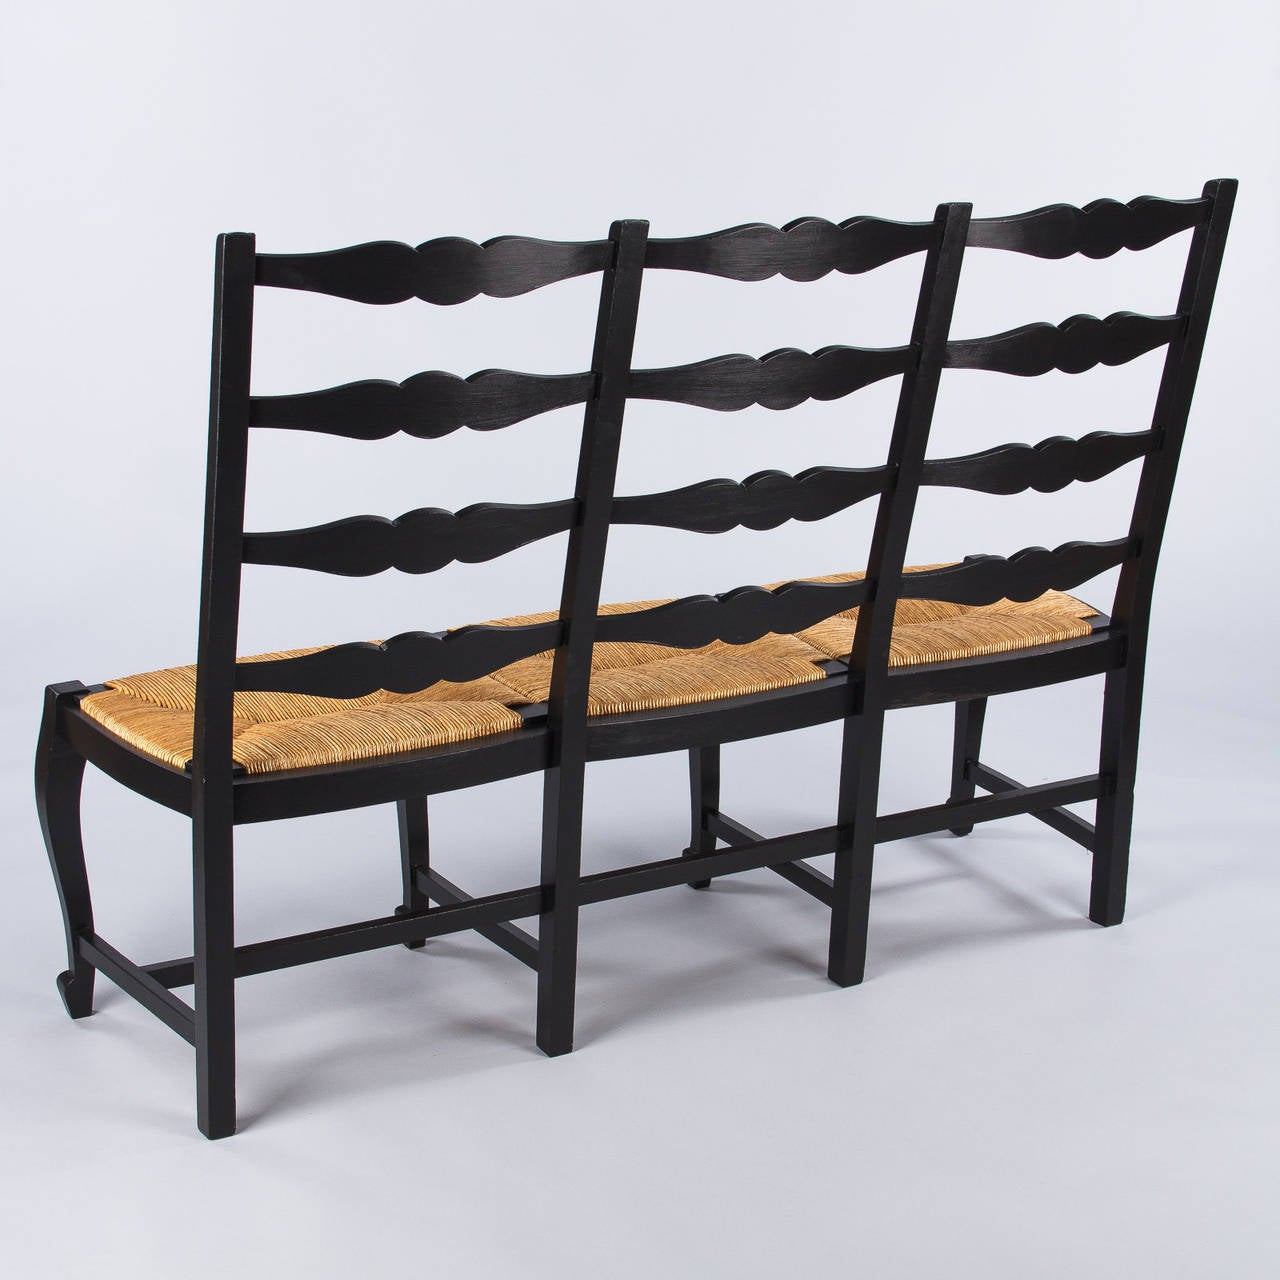 A typical three-seat bench from Provence called 